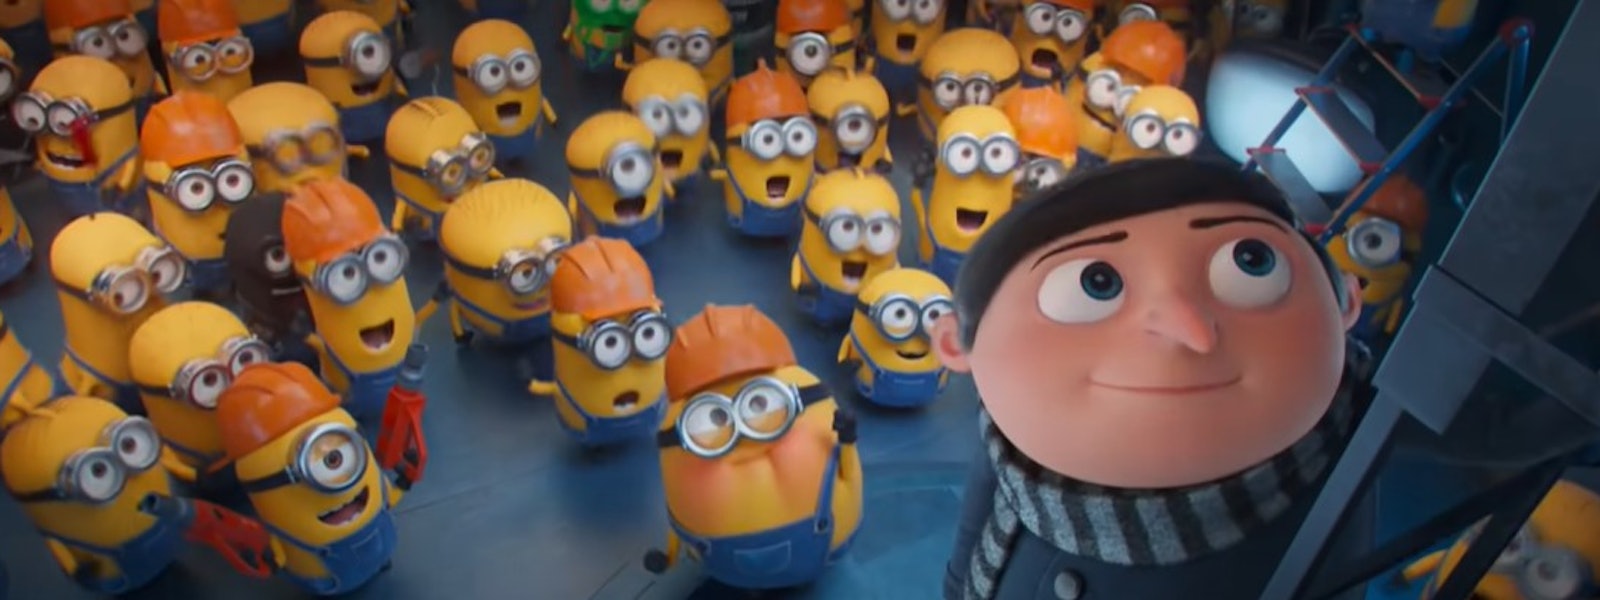 Minions: Rise of Gru is the fourth movie in the Despicable Me series.